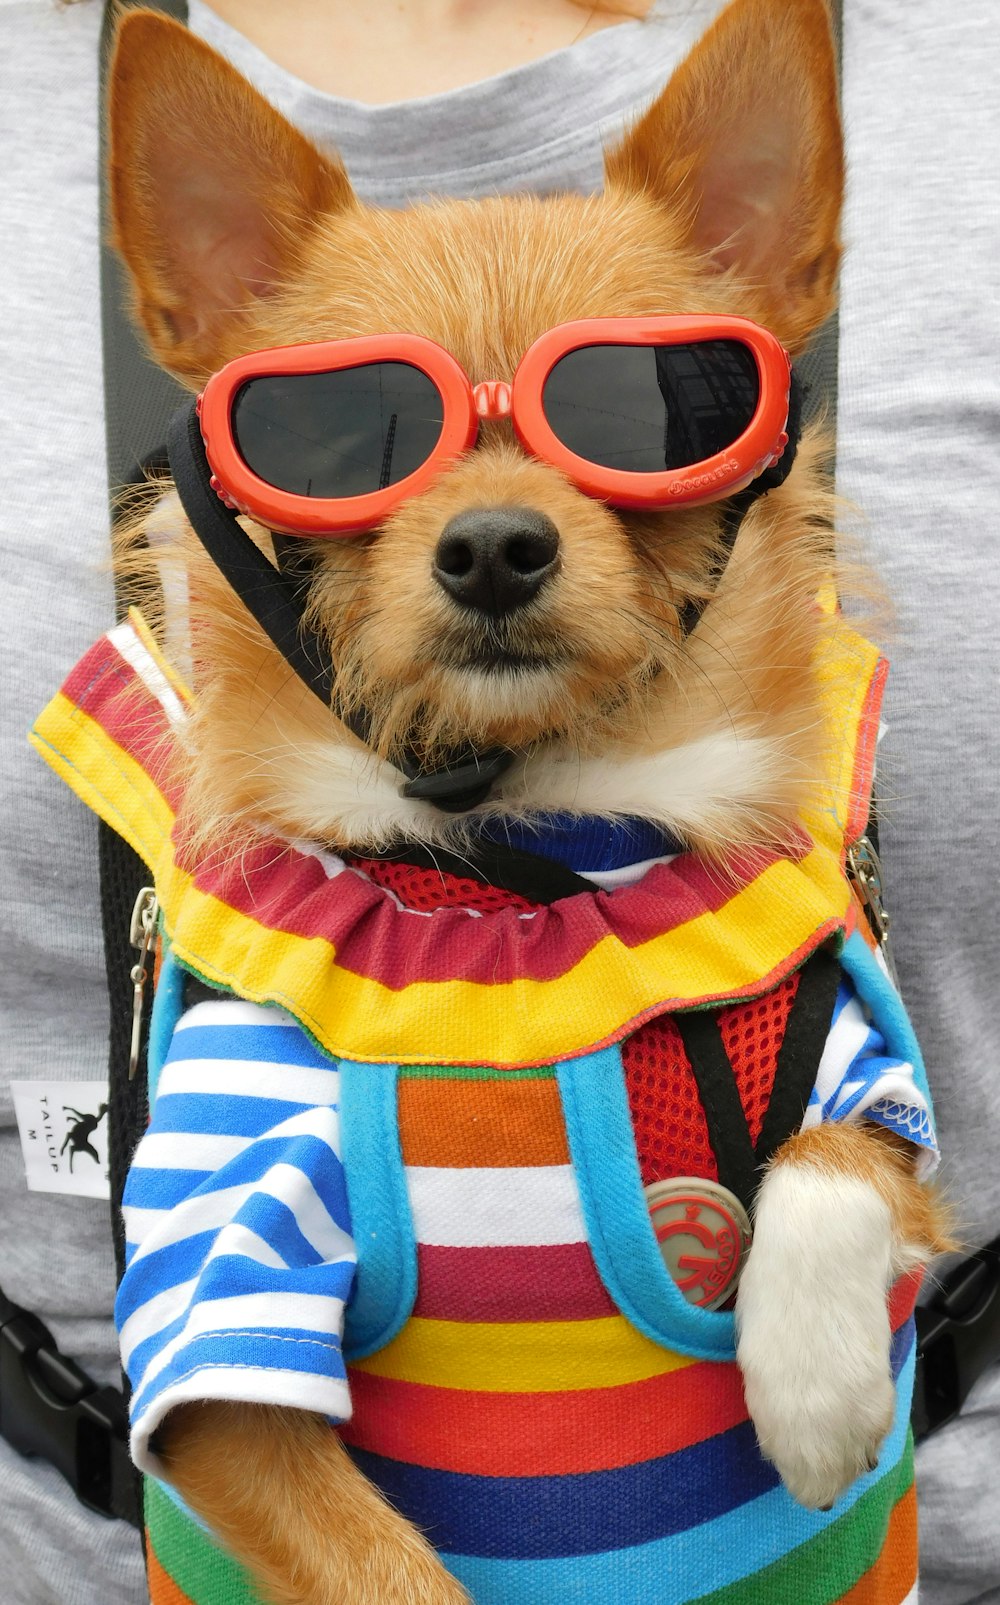 a small dog wearing sunglasses and a backpack